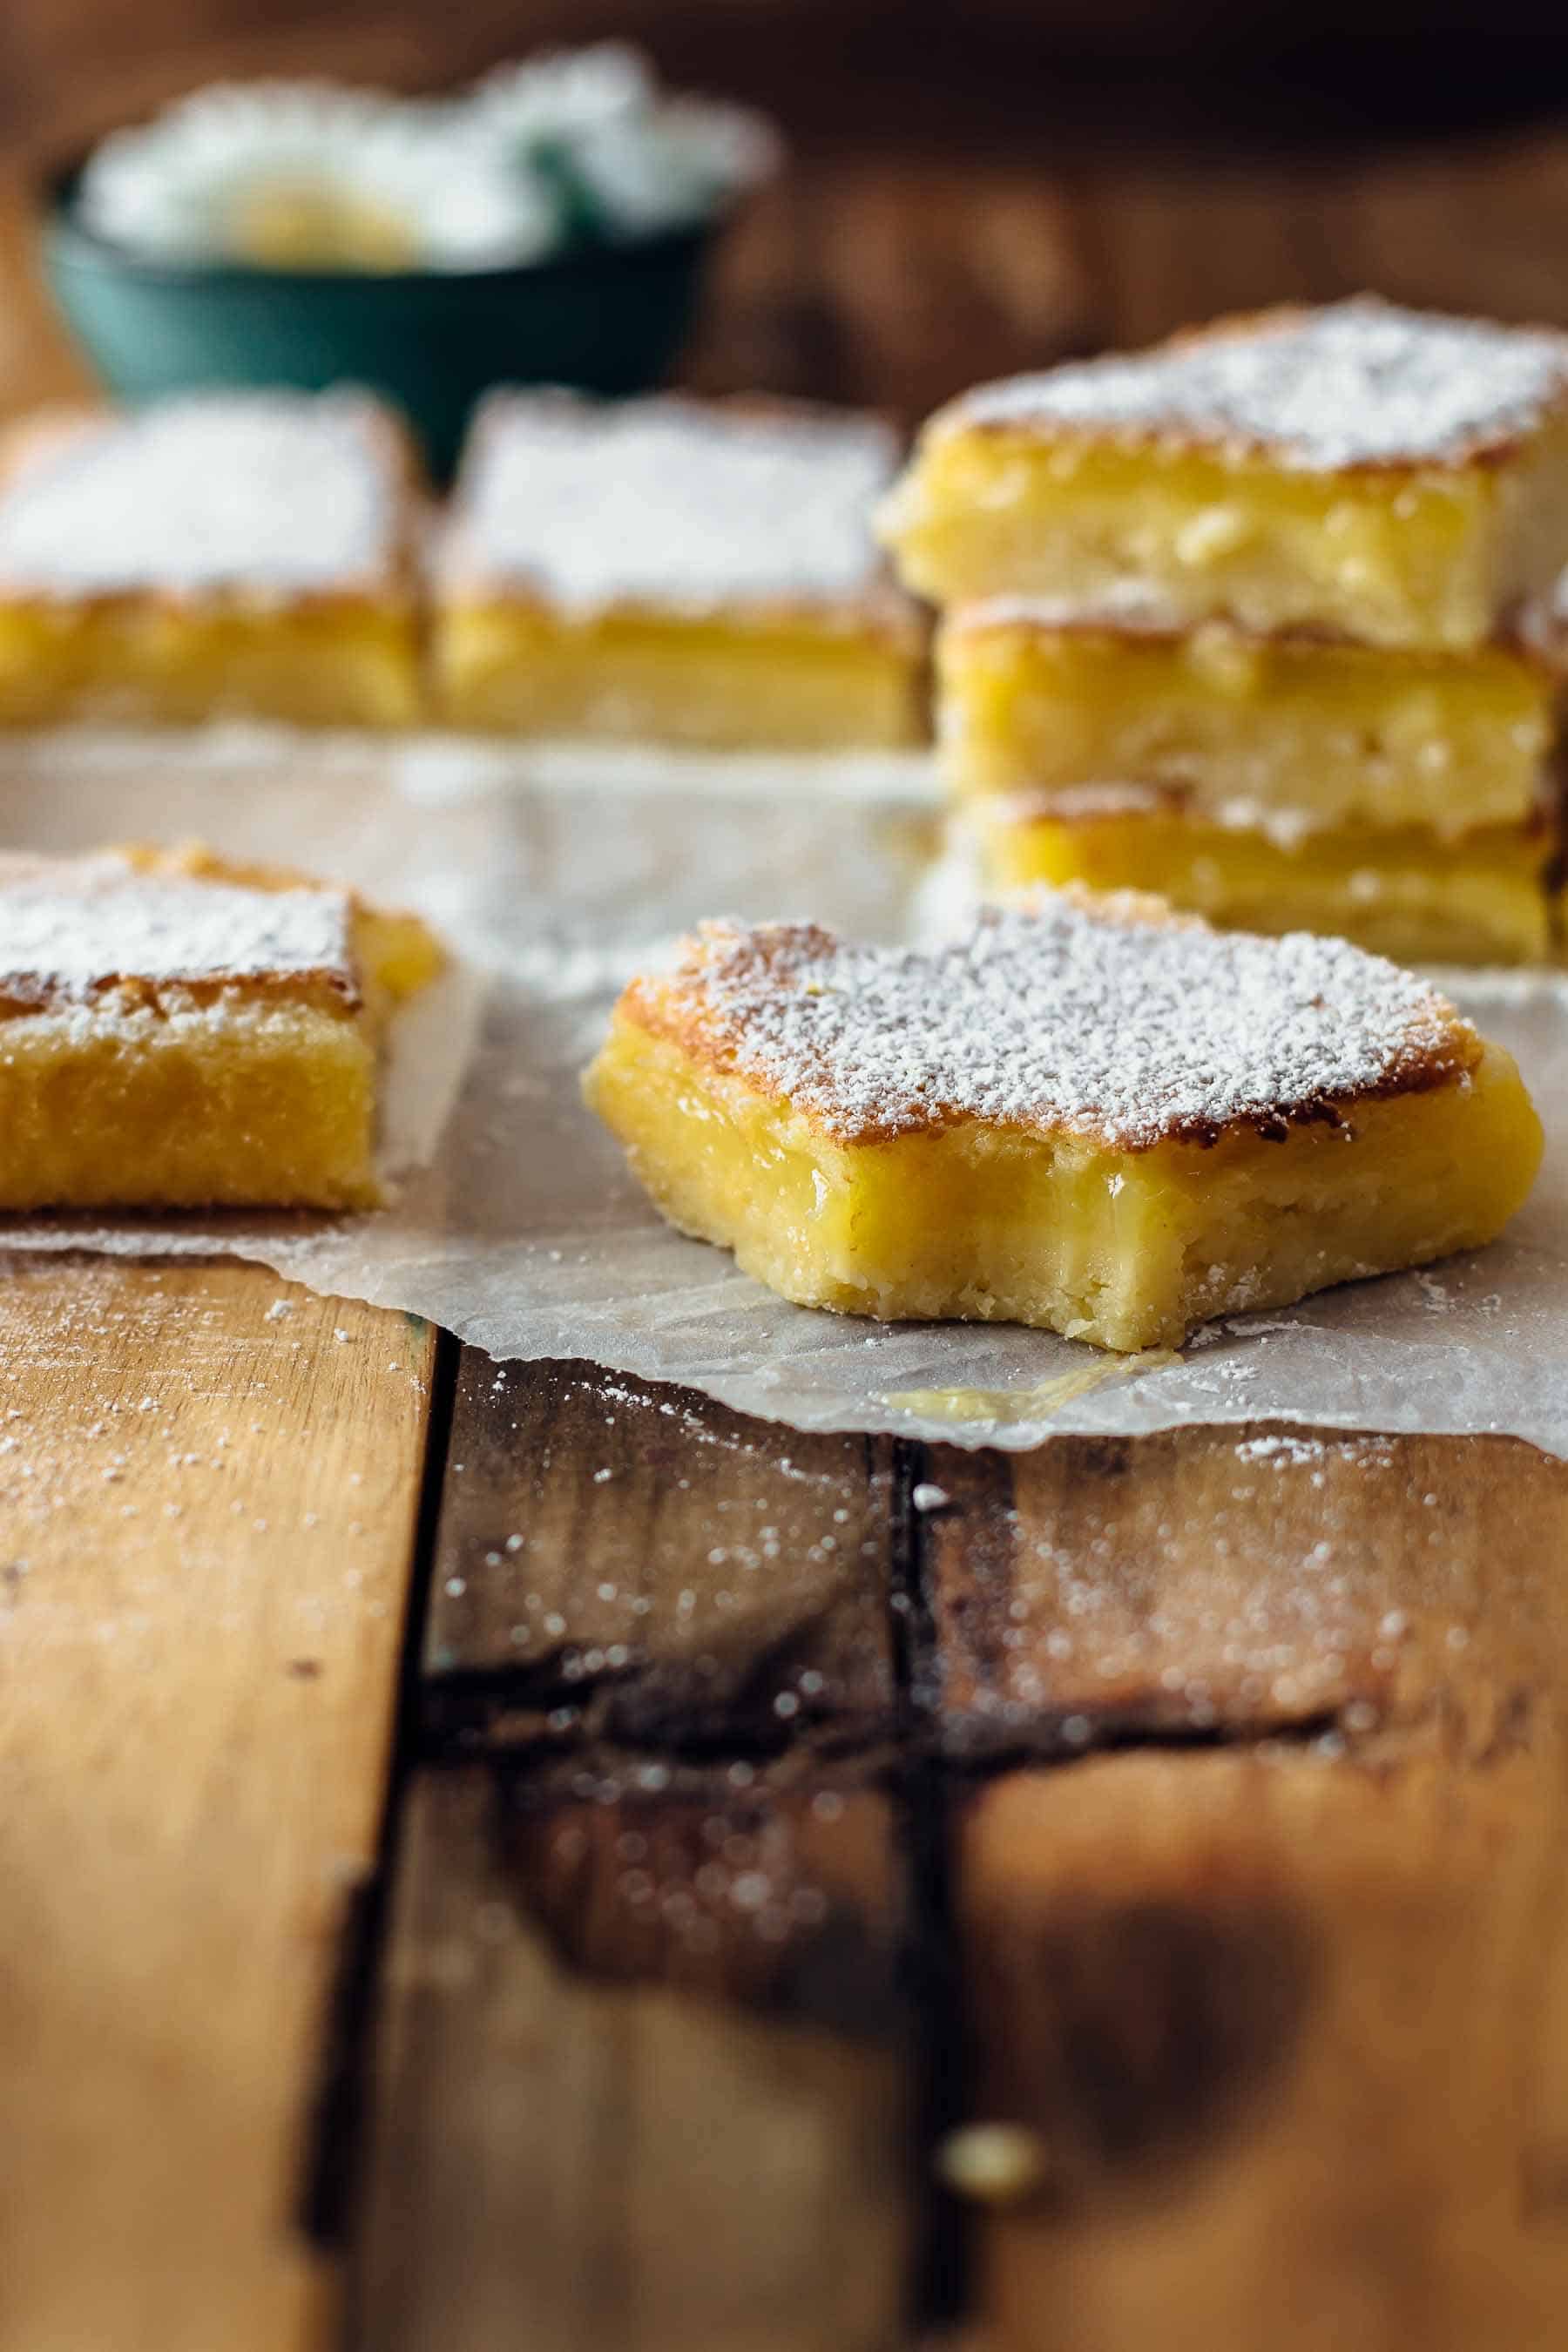 Decorative picture of bitten lemon bars on a wooden table